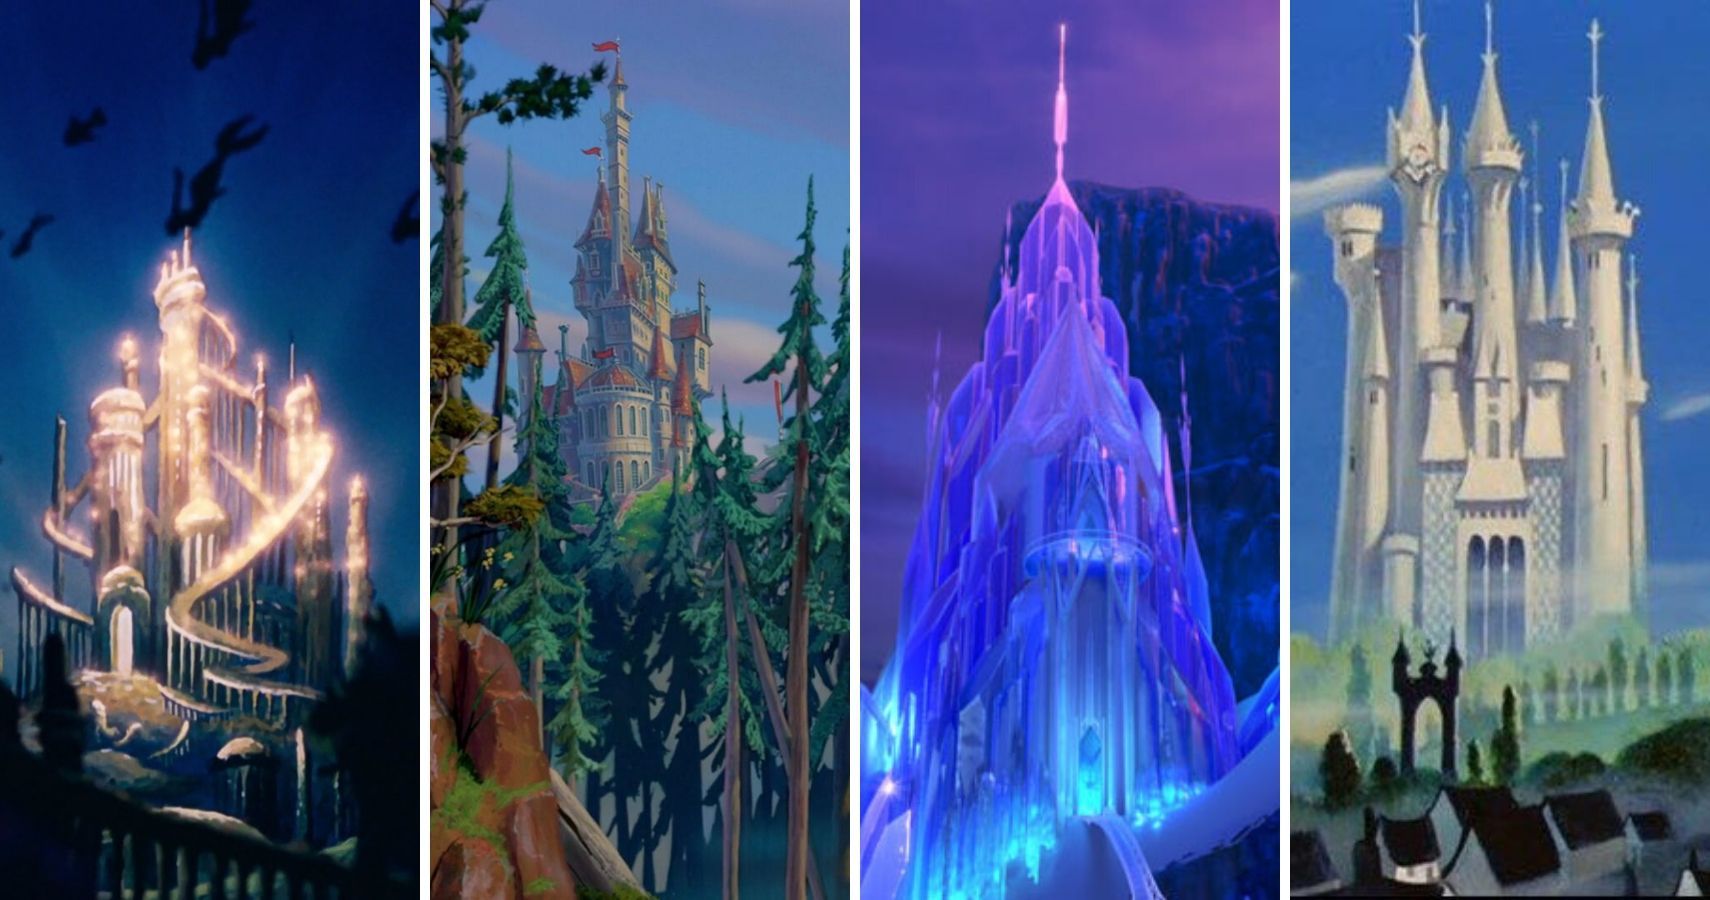 10 Disney Castles From The Movies To See Irl Screenrant